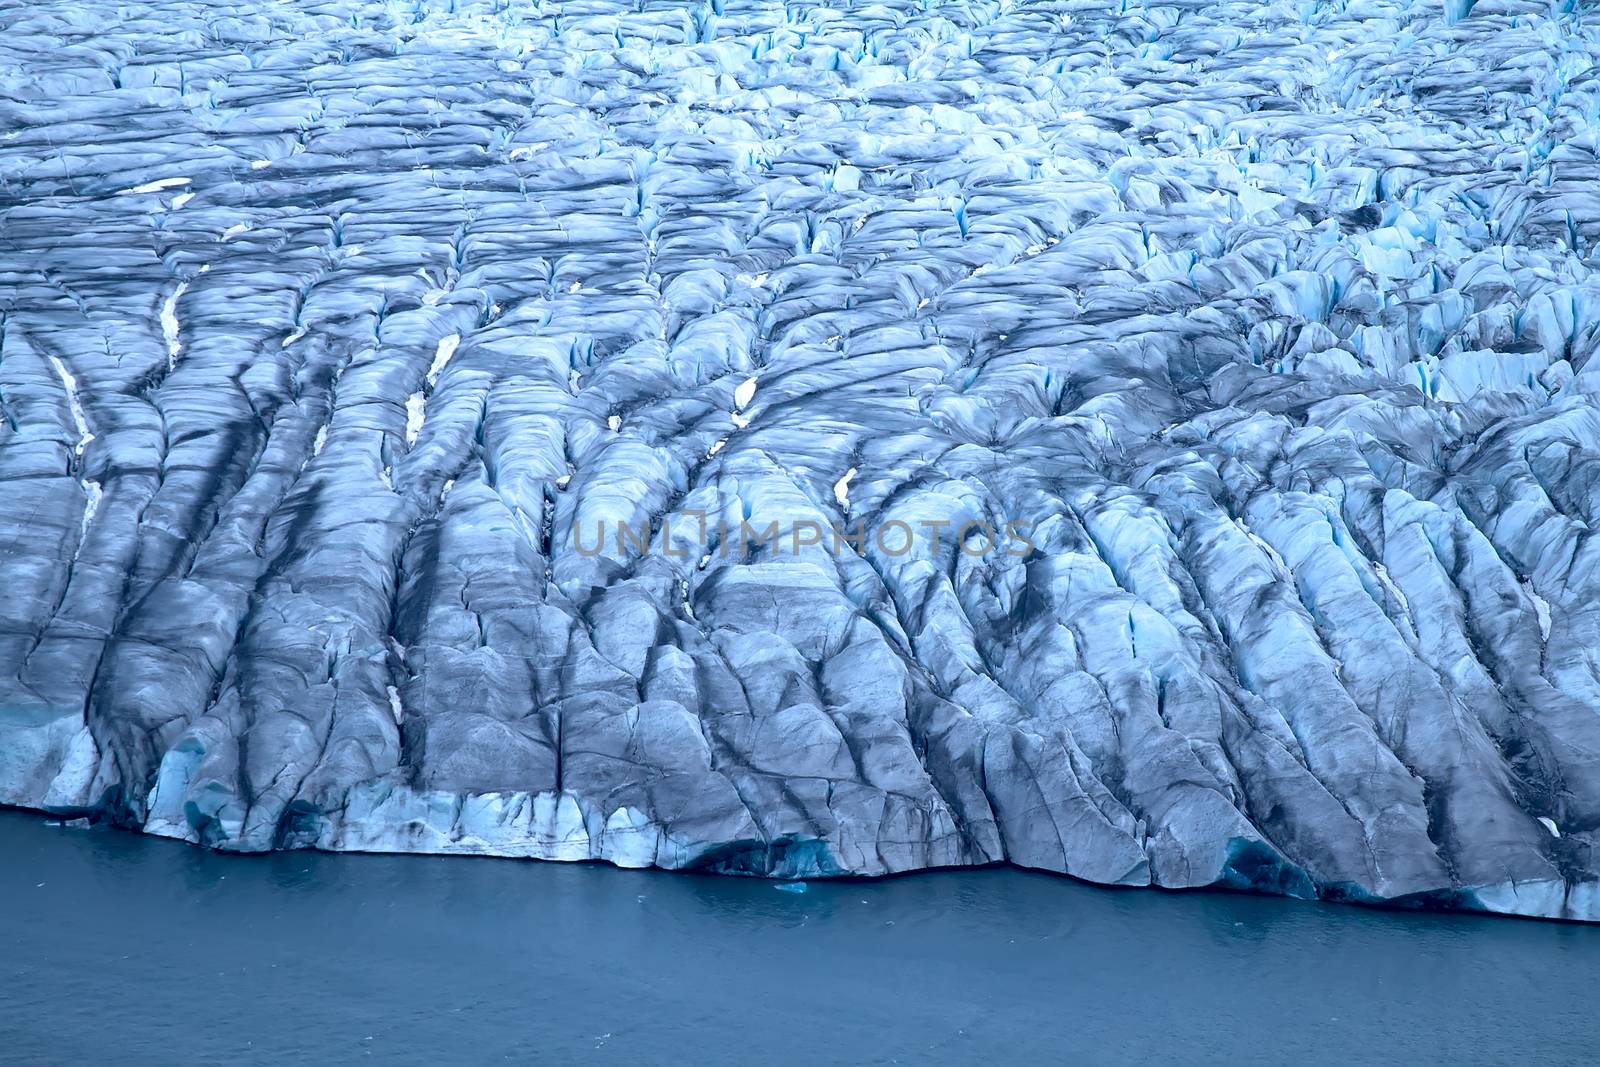 Harsh glaciers of Arctic. Live glacier: front wall and icefall (recently calved ice block in ablation zone). Novaya Zemlya archipelago, North island. View from helicopter